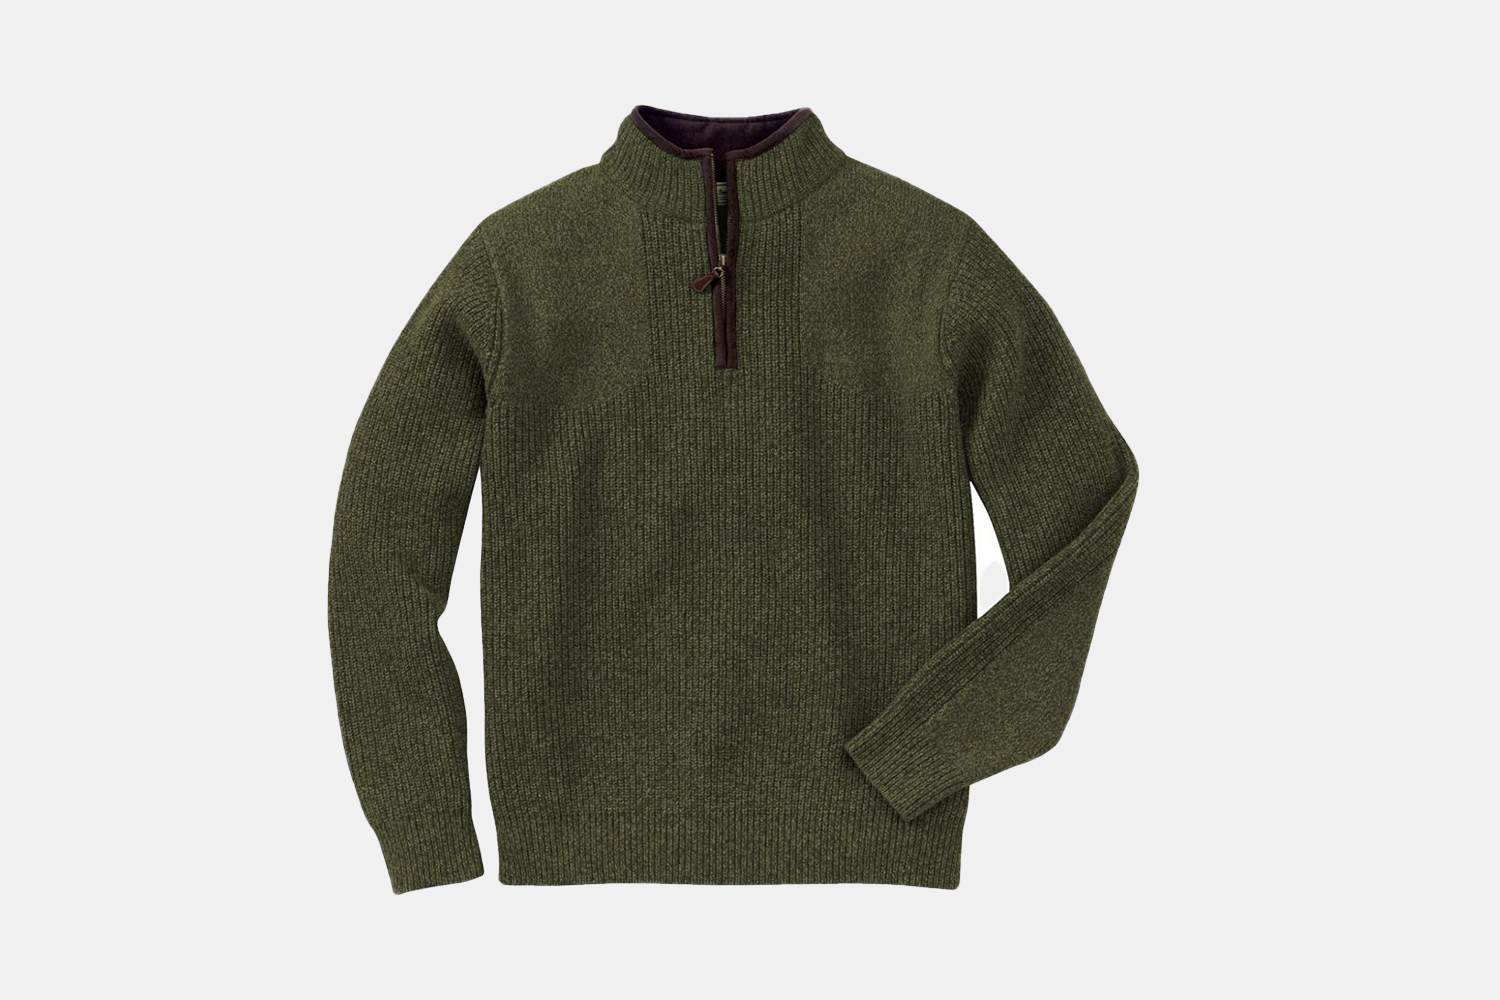 a high necked green knit sweater